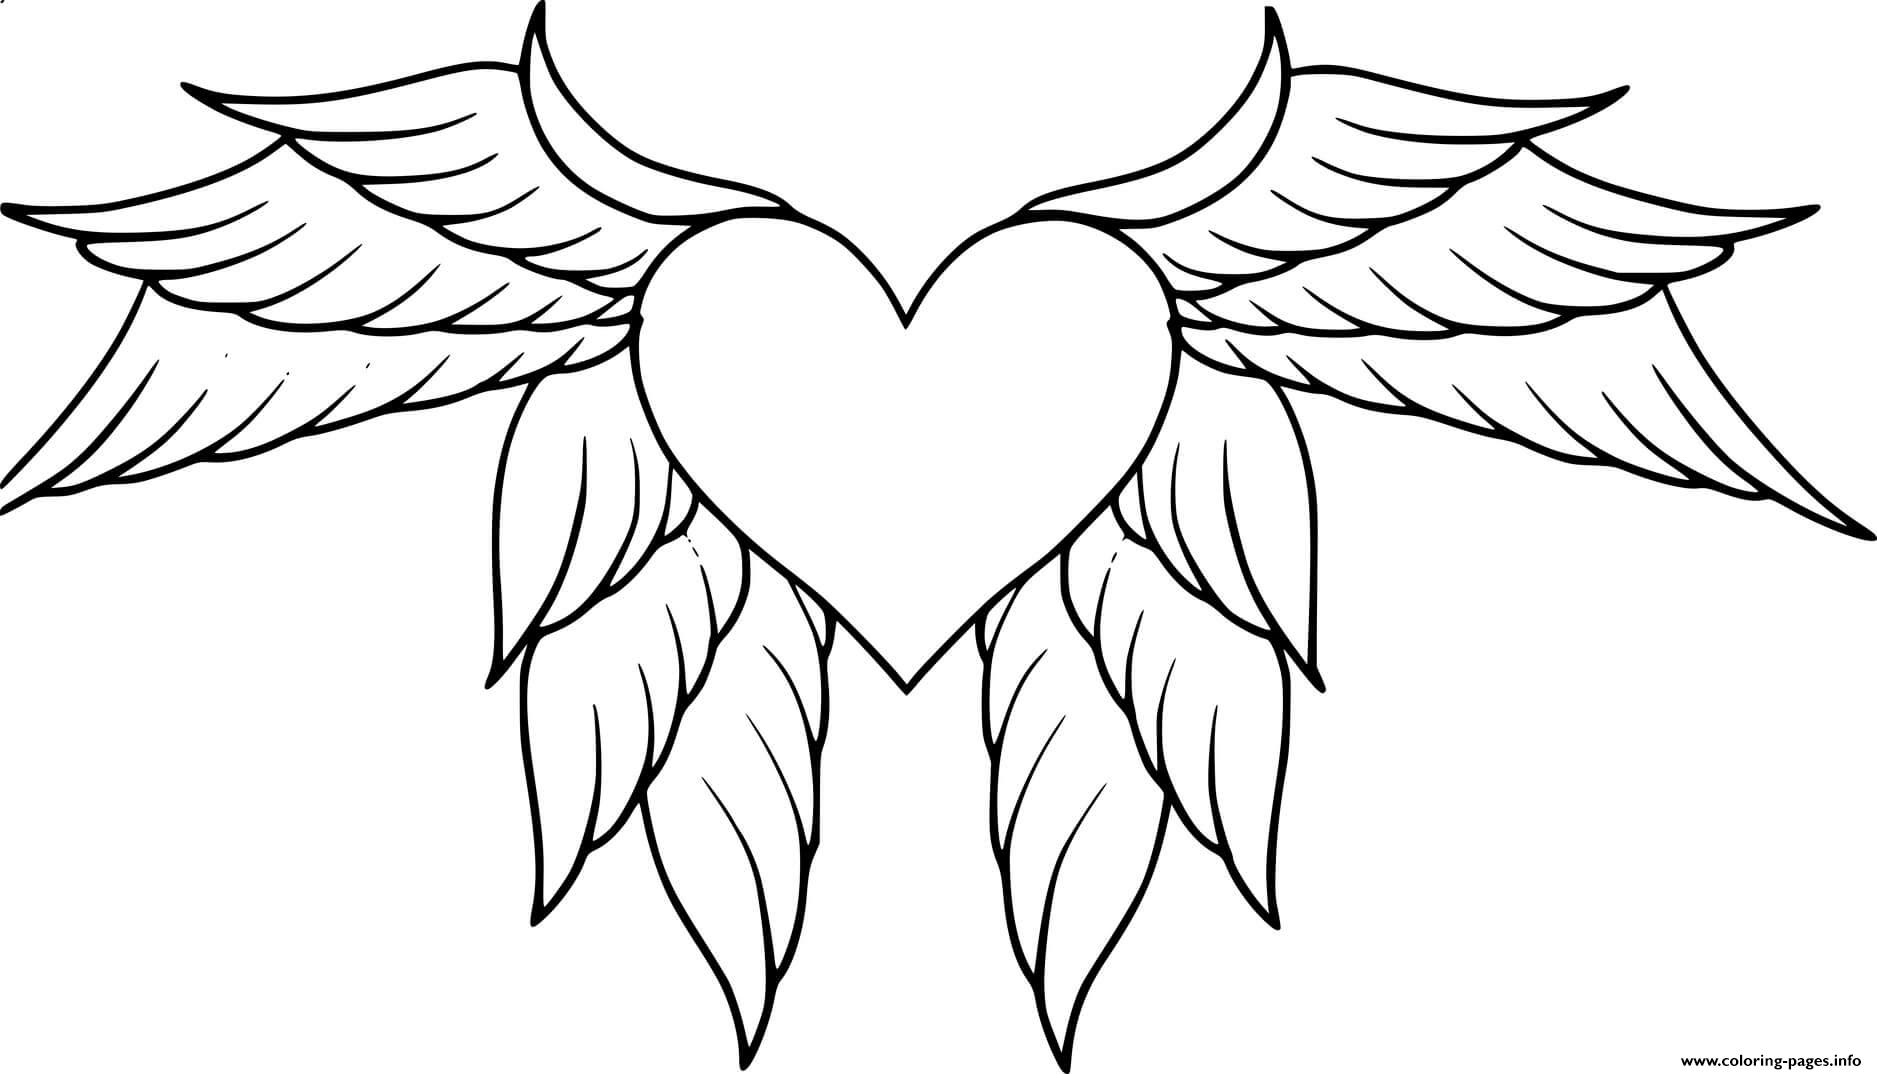 Heart With Many Wings coloring